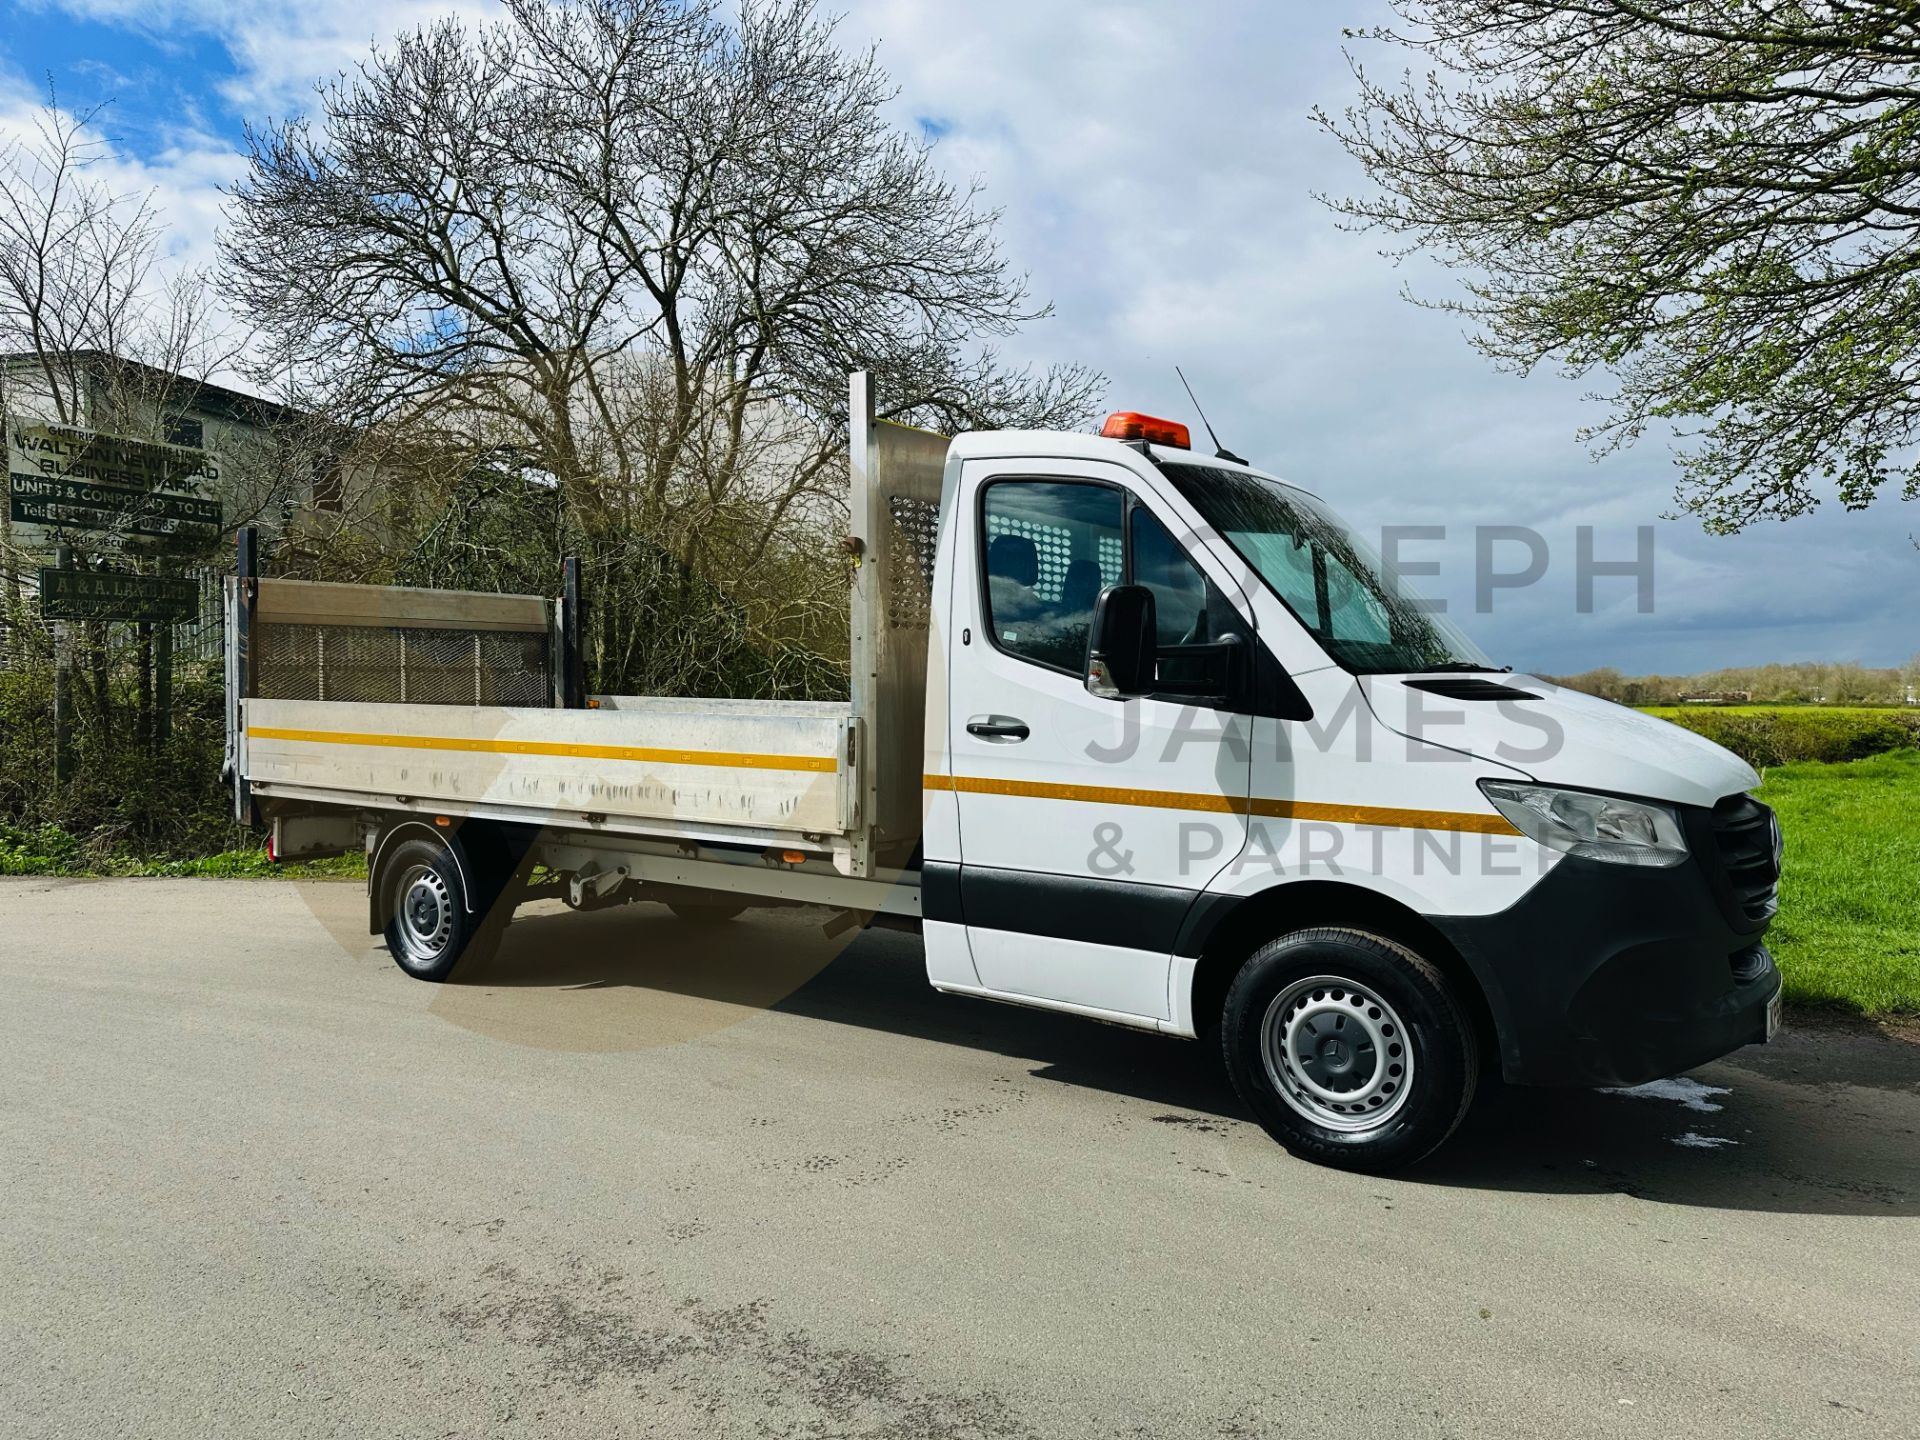 (On Sale) MERCEDES SPRINTER 316CDI 3.5T DROPSIDE TRUCK WITH ELECTRIC TAIL LIFT- 2020 MODEL - FSH